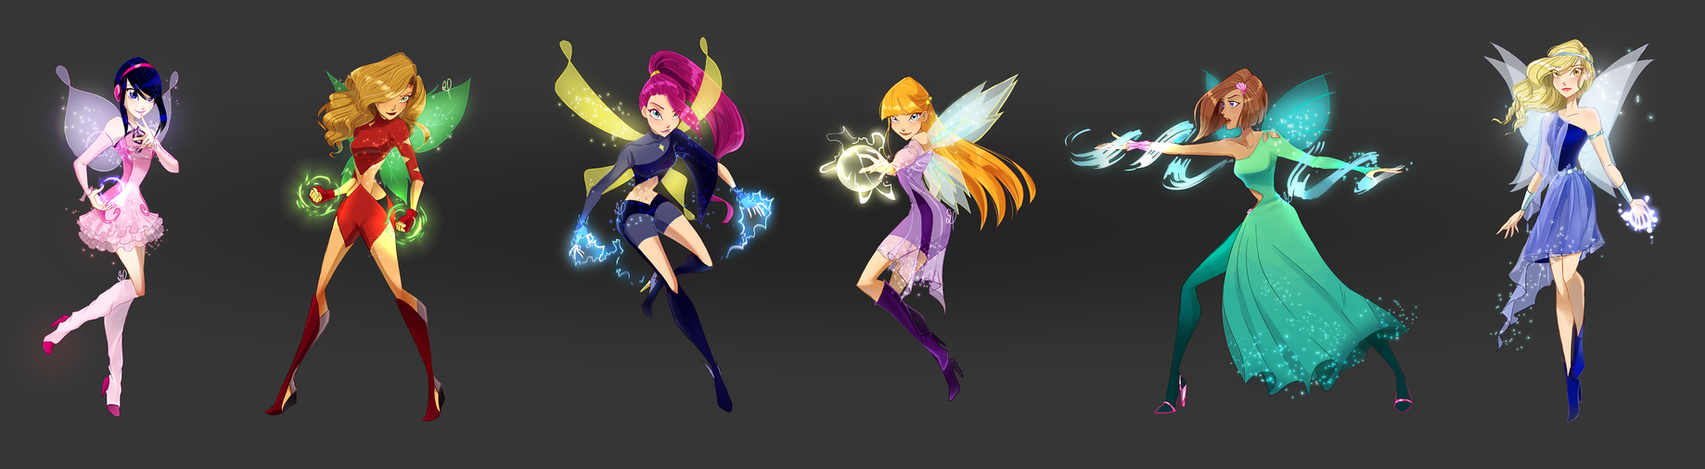 almost_magical__winx_concept_designs_by_chocolatesmoothie-da0tym2